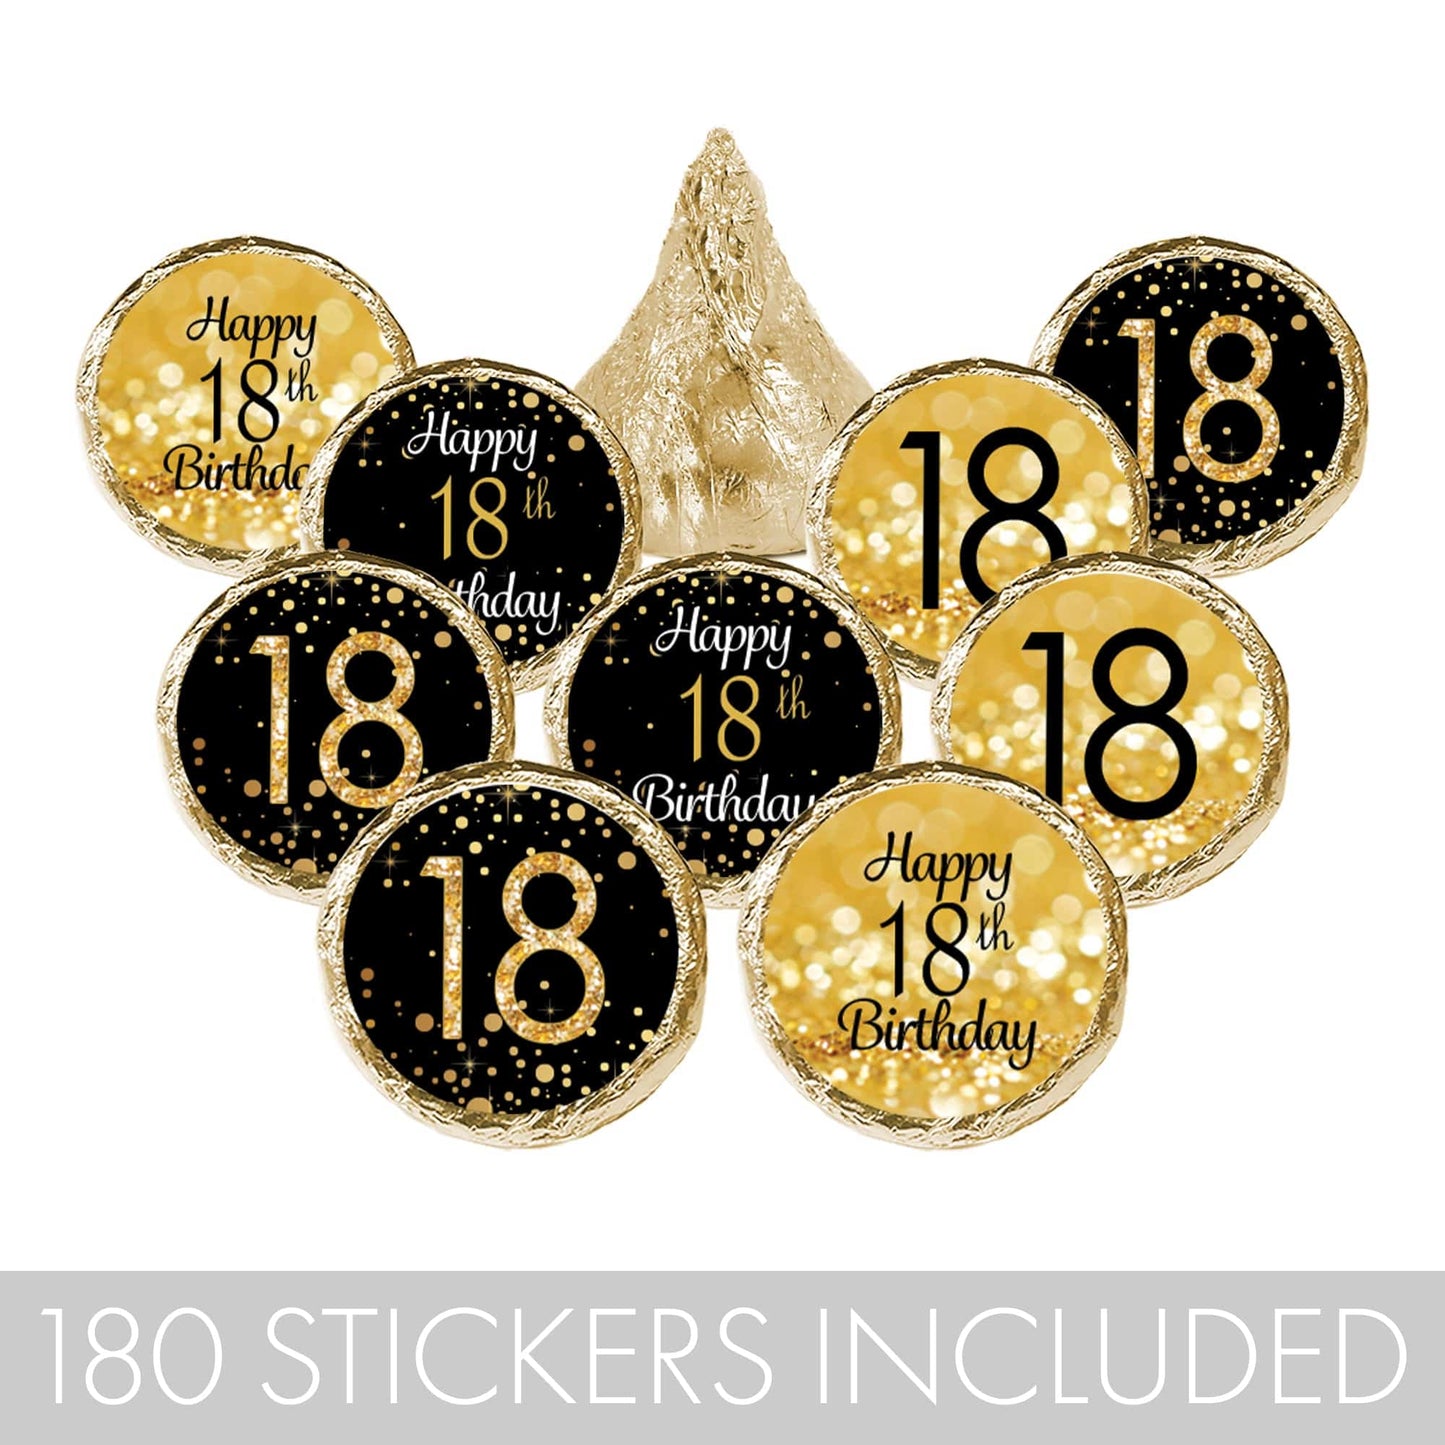 180 black and gold stickers to add some sparkle to your 18th birthday party!